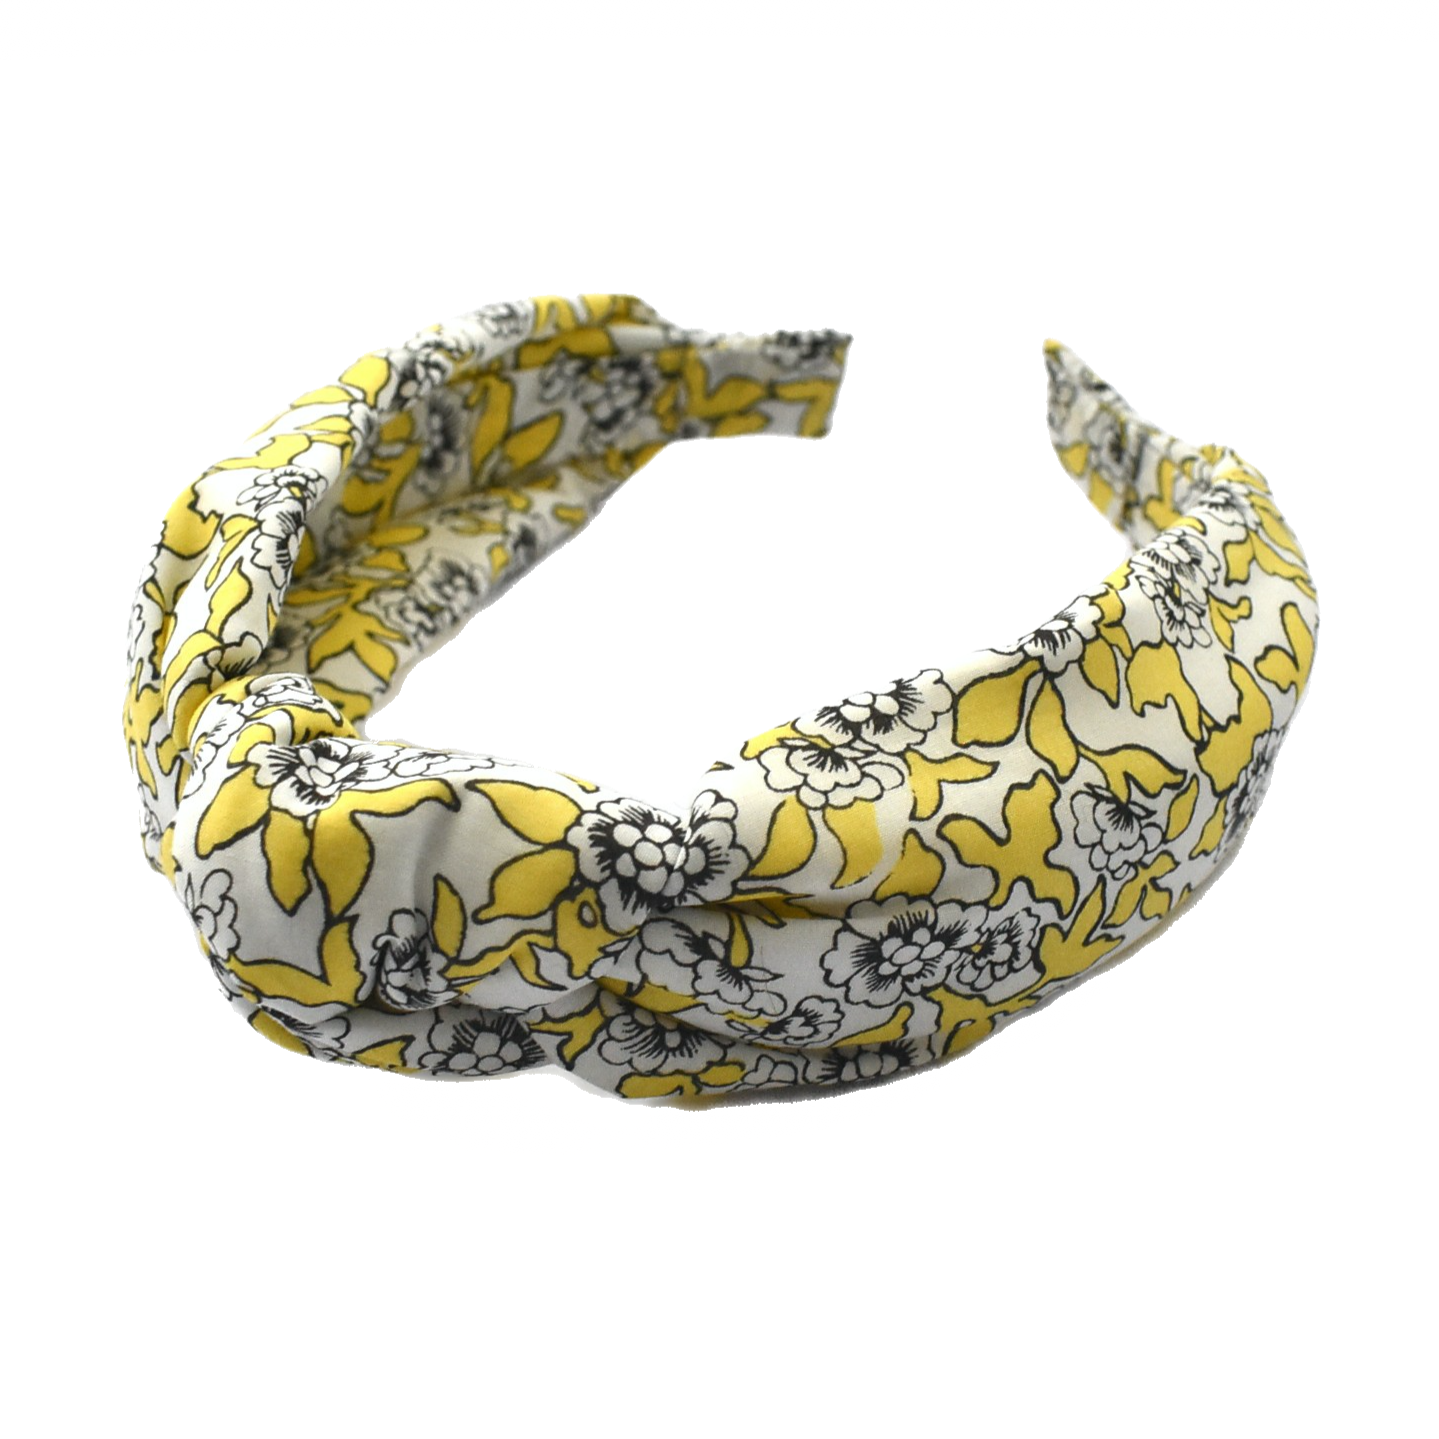 Classic Knot head band - Yellow and Black Floral Liberty of London Dinisty print